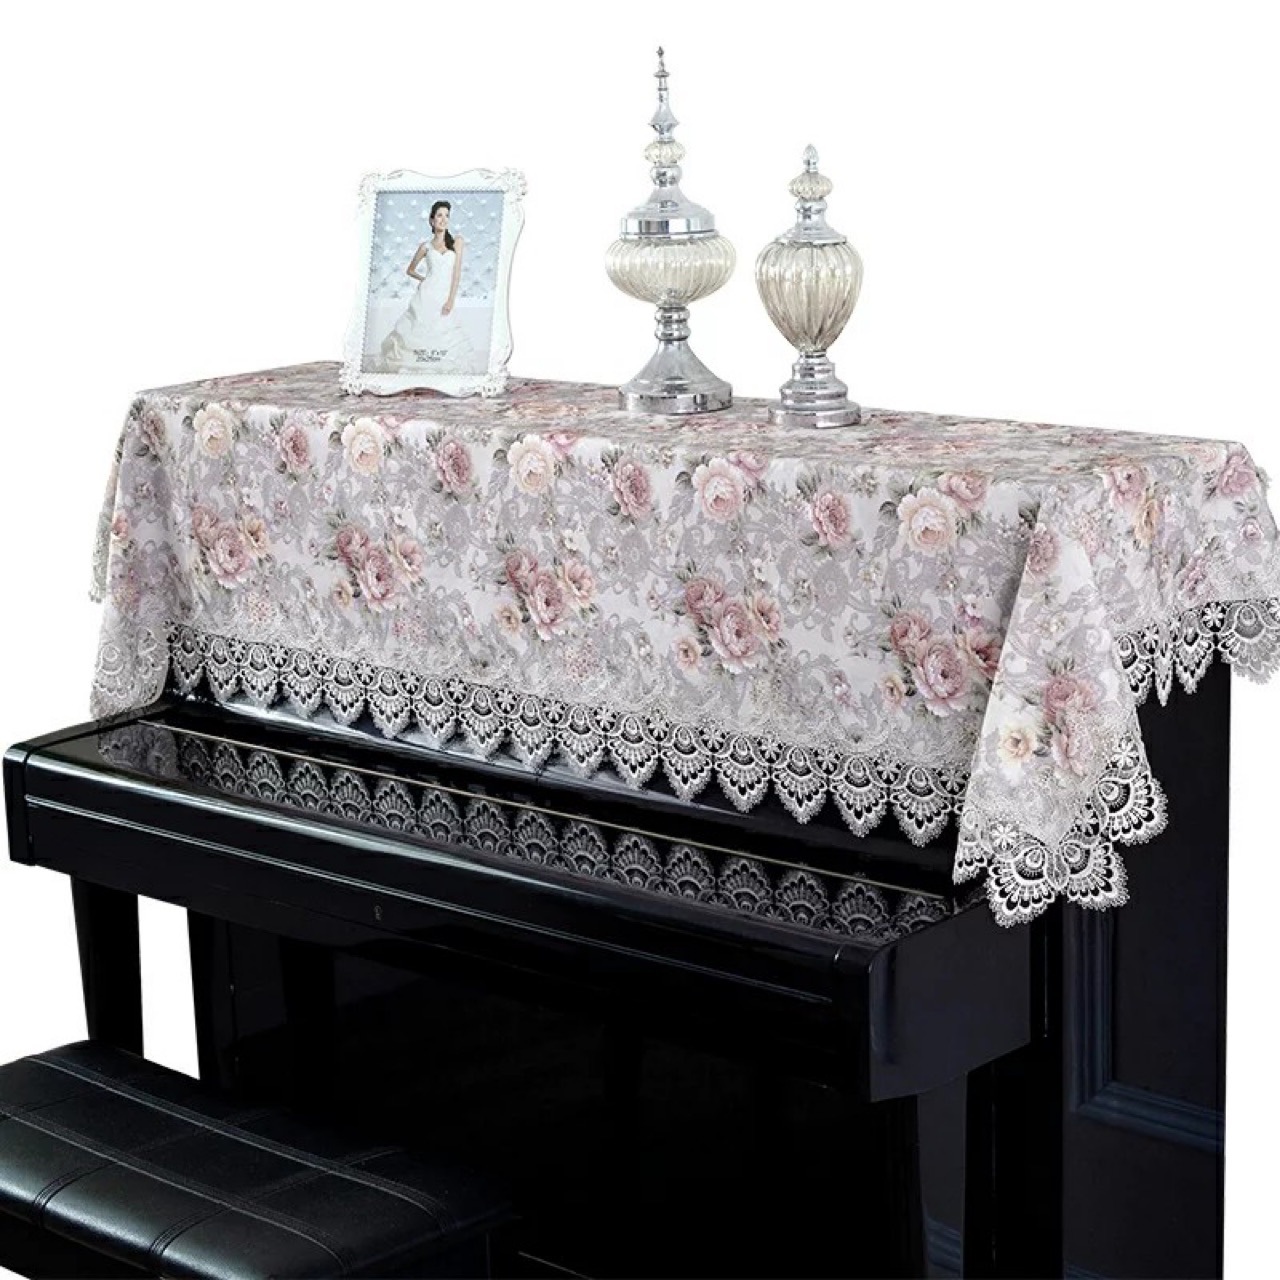 Manufactor Supplying Piano cover European style Piano dustproof Protective cover Piano Lace Fabric art head-cover or veil for the bride at a wedding Gabion